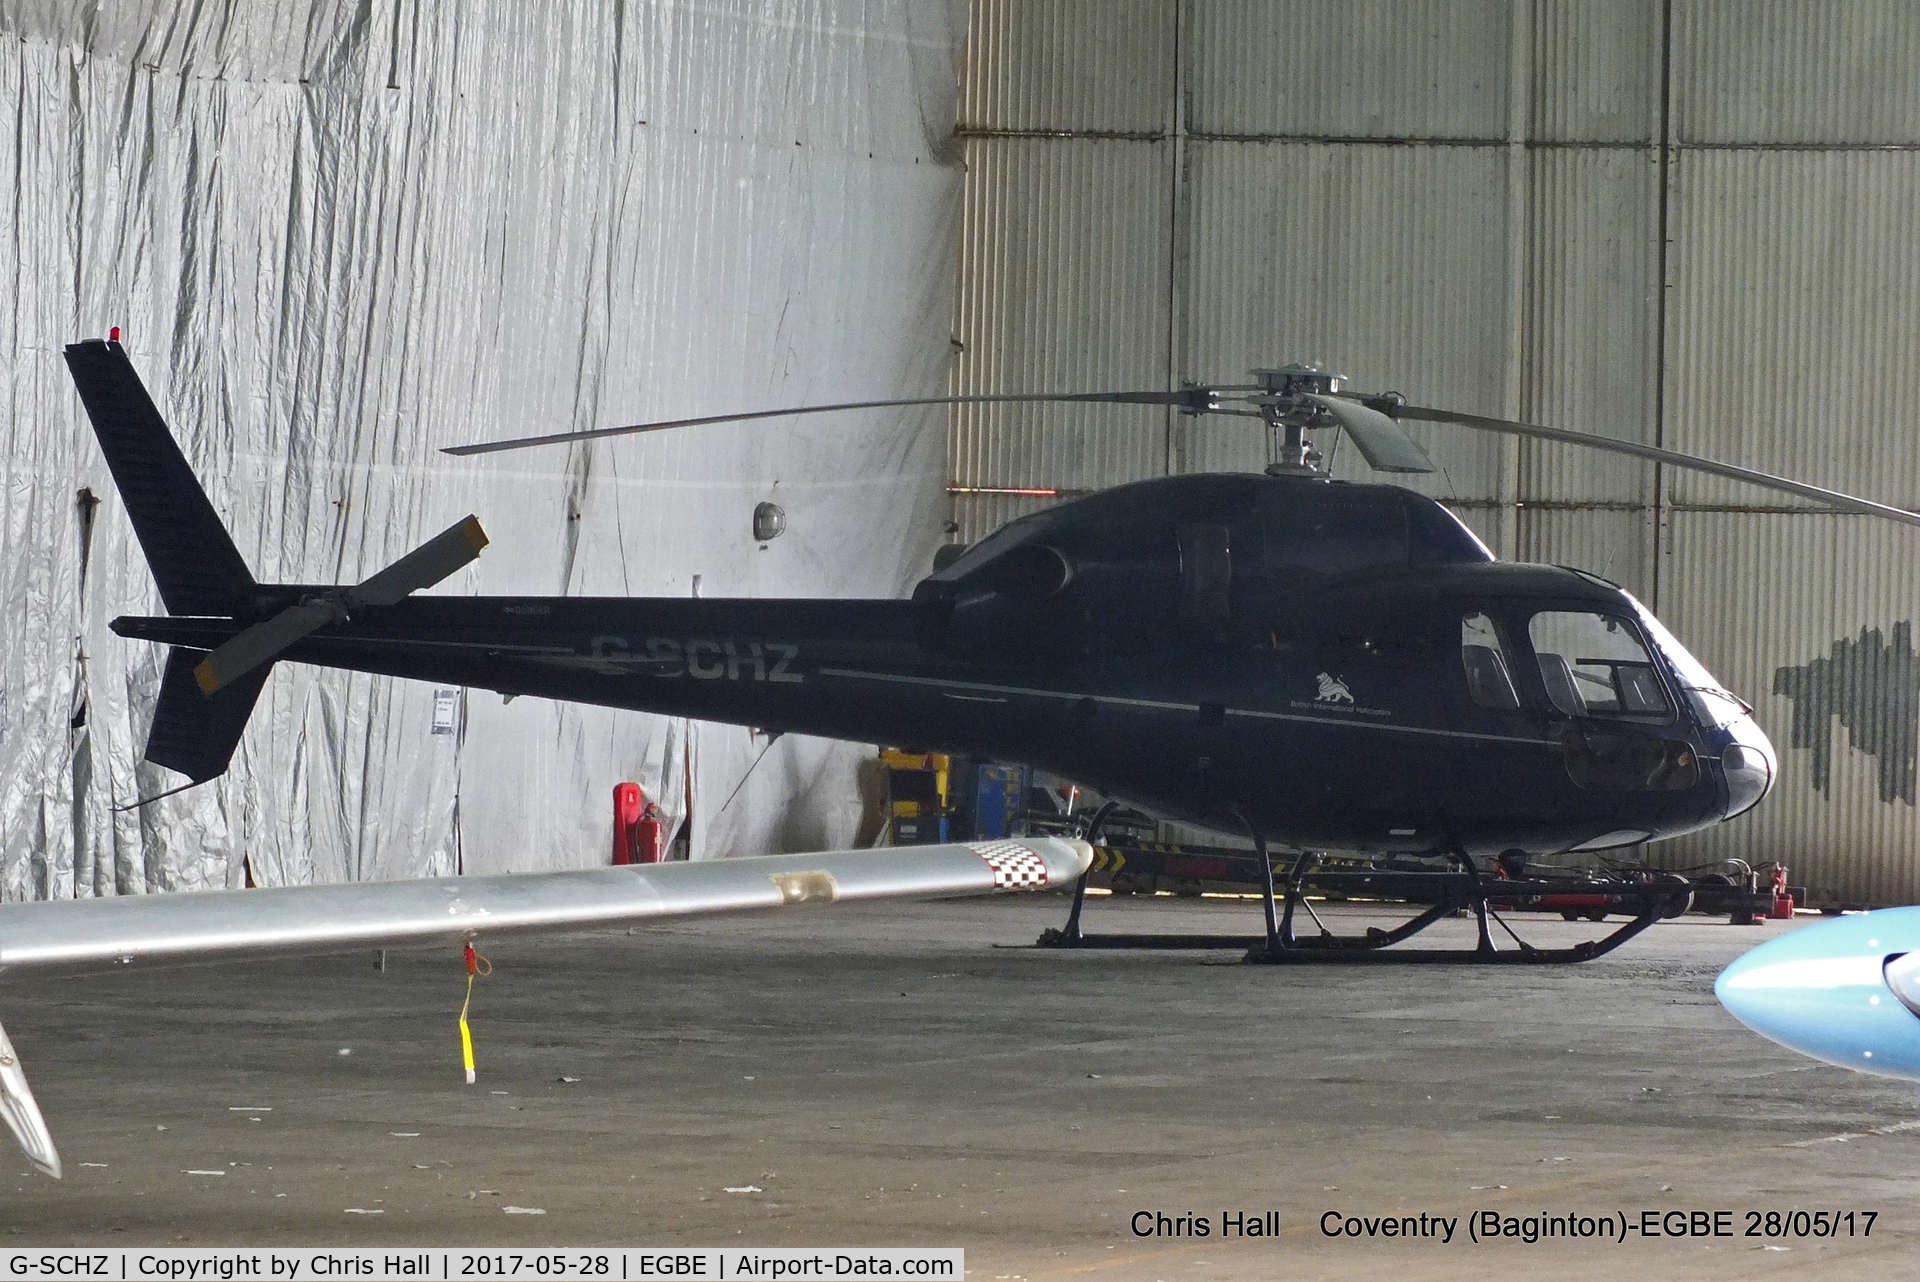 G-SCHZ, 1999 Eurocopter AS-355N Ecureuil 2 C/N 5663, at Coventry